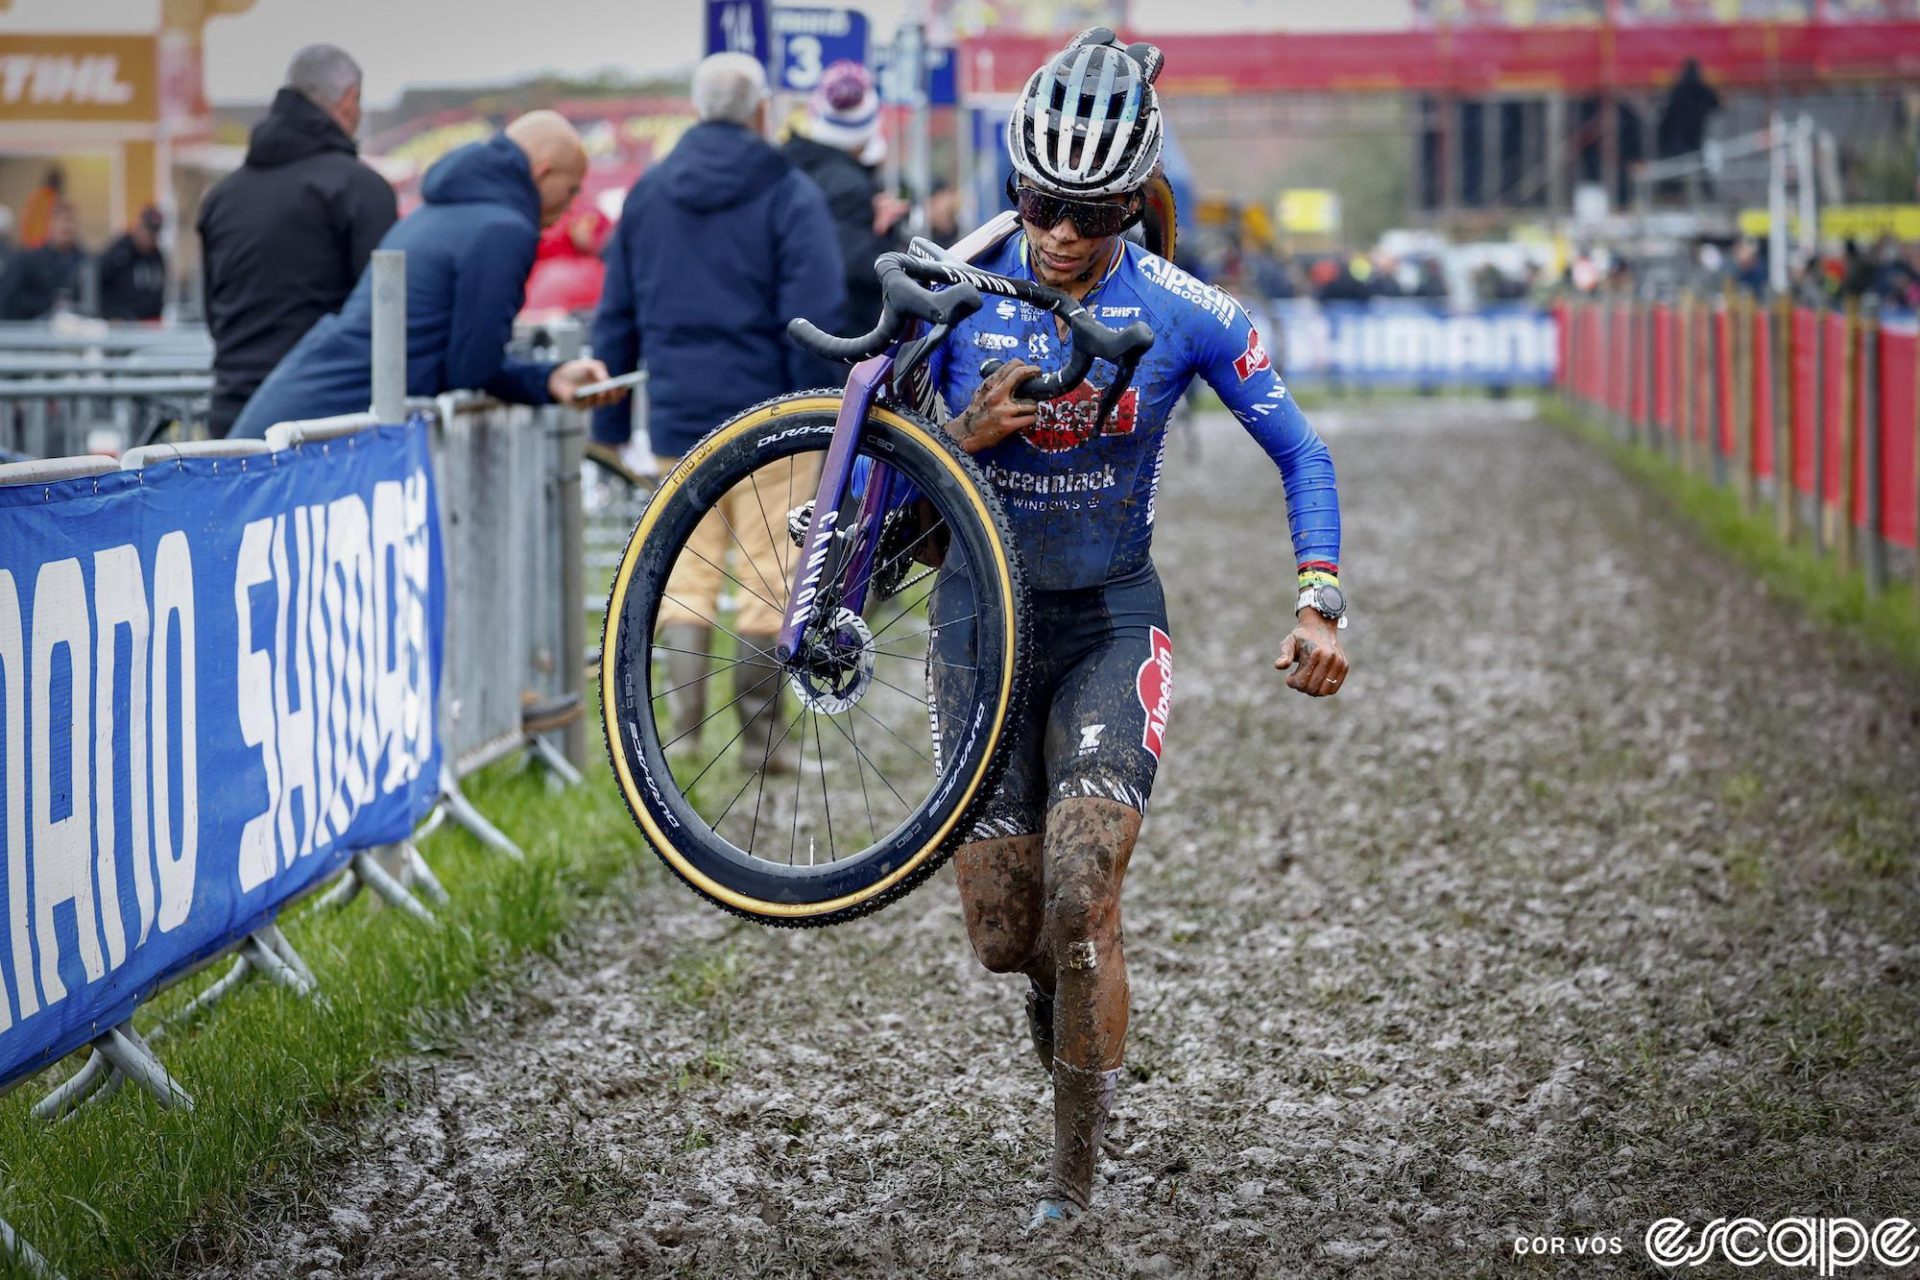 Ceylin del Carmen Alvarado runs in the mud at the World Cup Dendermonde. She's alone, with no other racer in sight behind her.